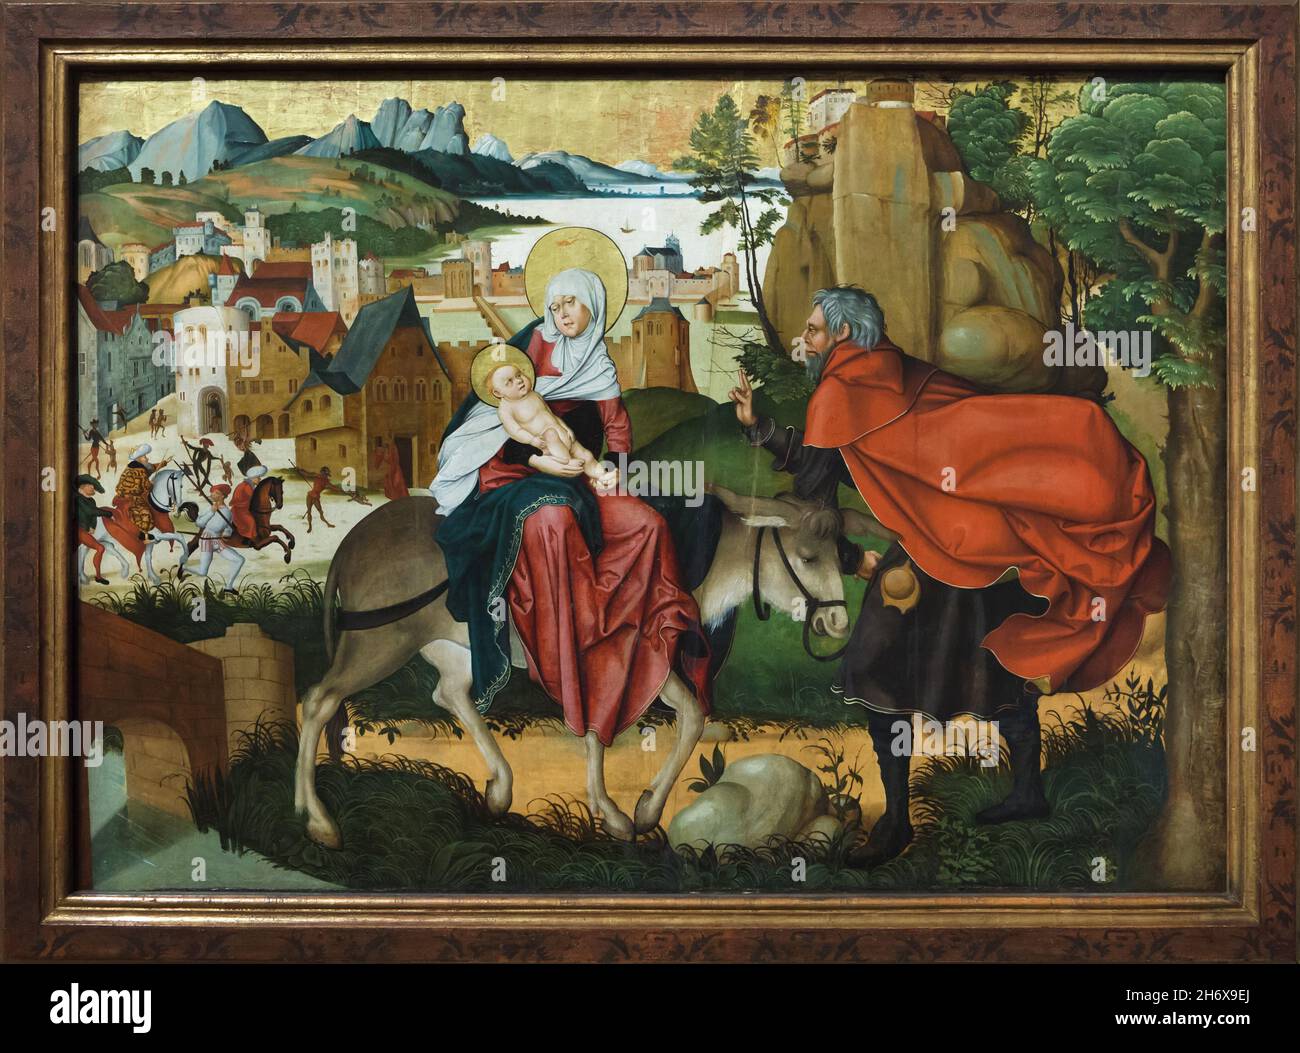 Painting 'Flight into Egypt' from the Aggsbach Altarpiece by German Renaissance painter Jörg Breu the Elder (1501) on display at the special exhibition in the Belvedere Museum in Vienna, Austria. The exhibition entitled 'The Age of Dürer' and devoted to Austria at the Gate of the Renaissance runs till 22 January 2022. Stock Photo